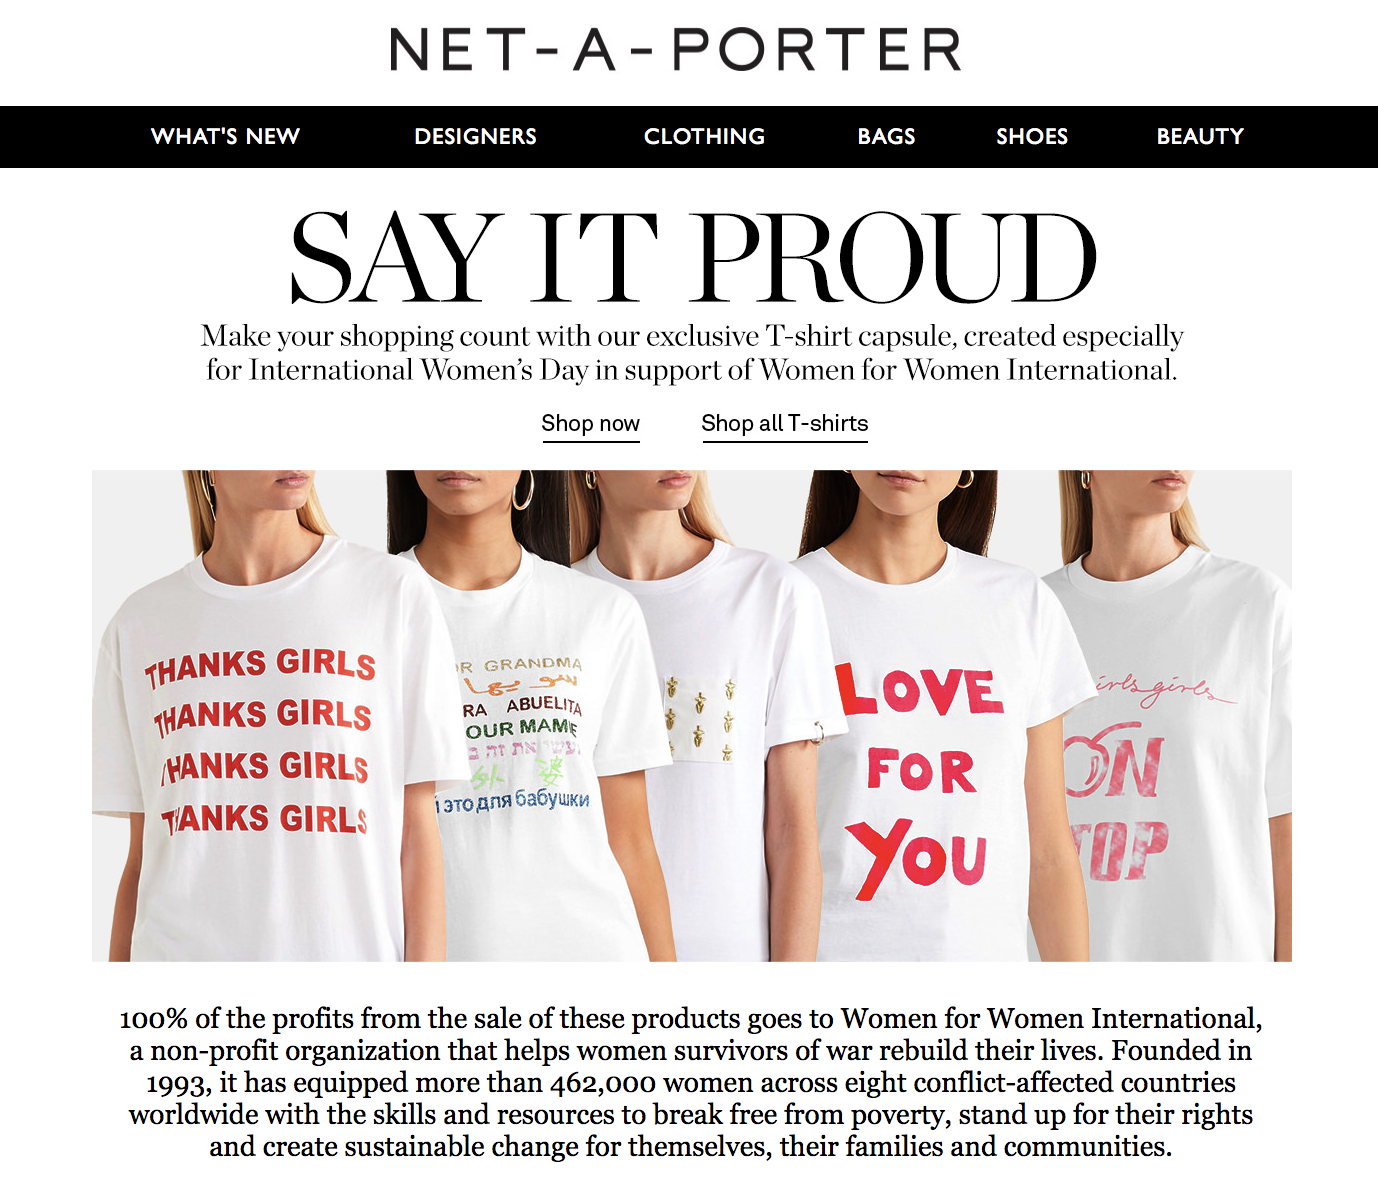 Example of an email sent by Net-a-Porter on International's Women Day